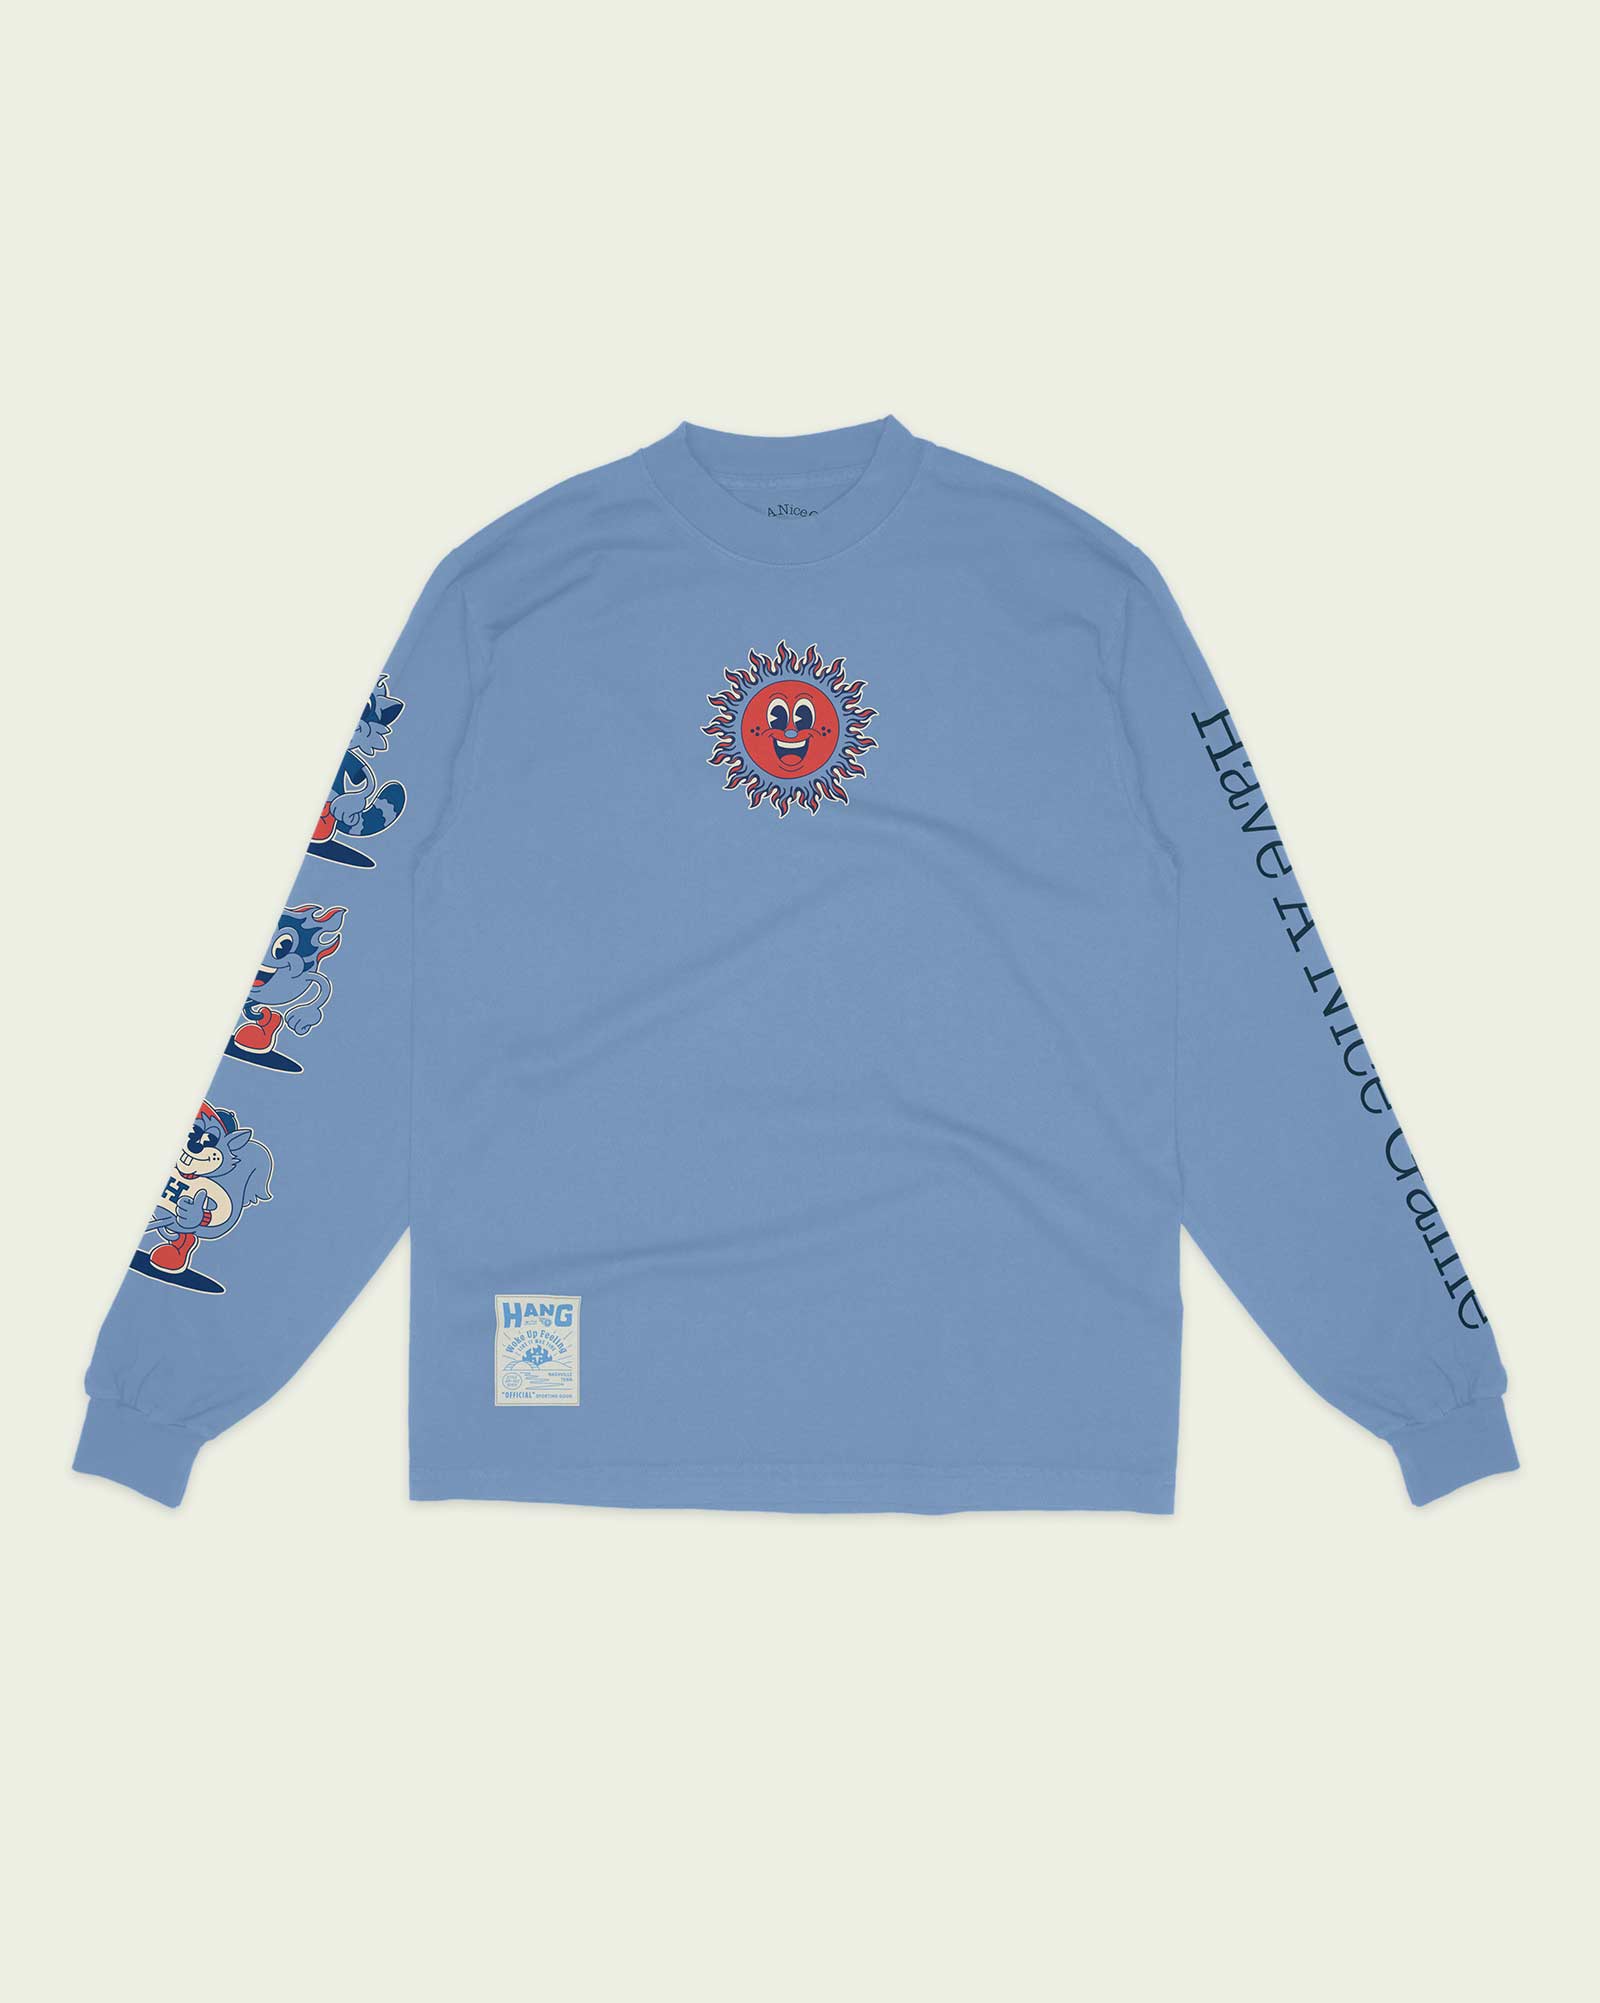 The Game Day March Long Sleeve Tee